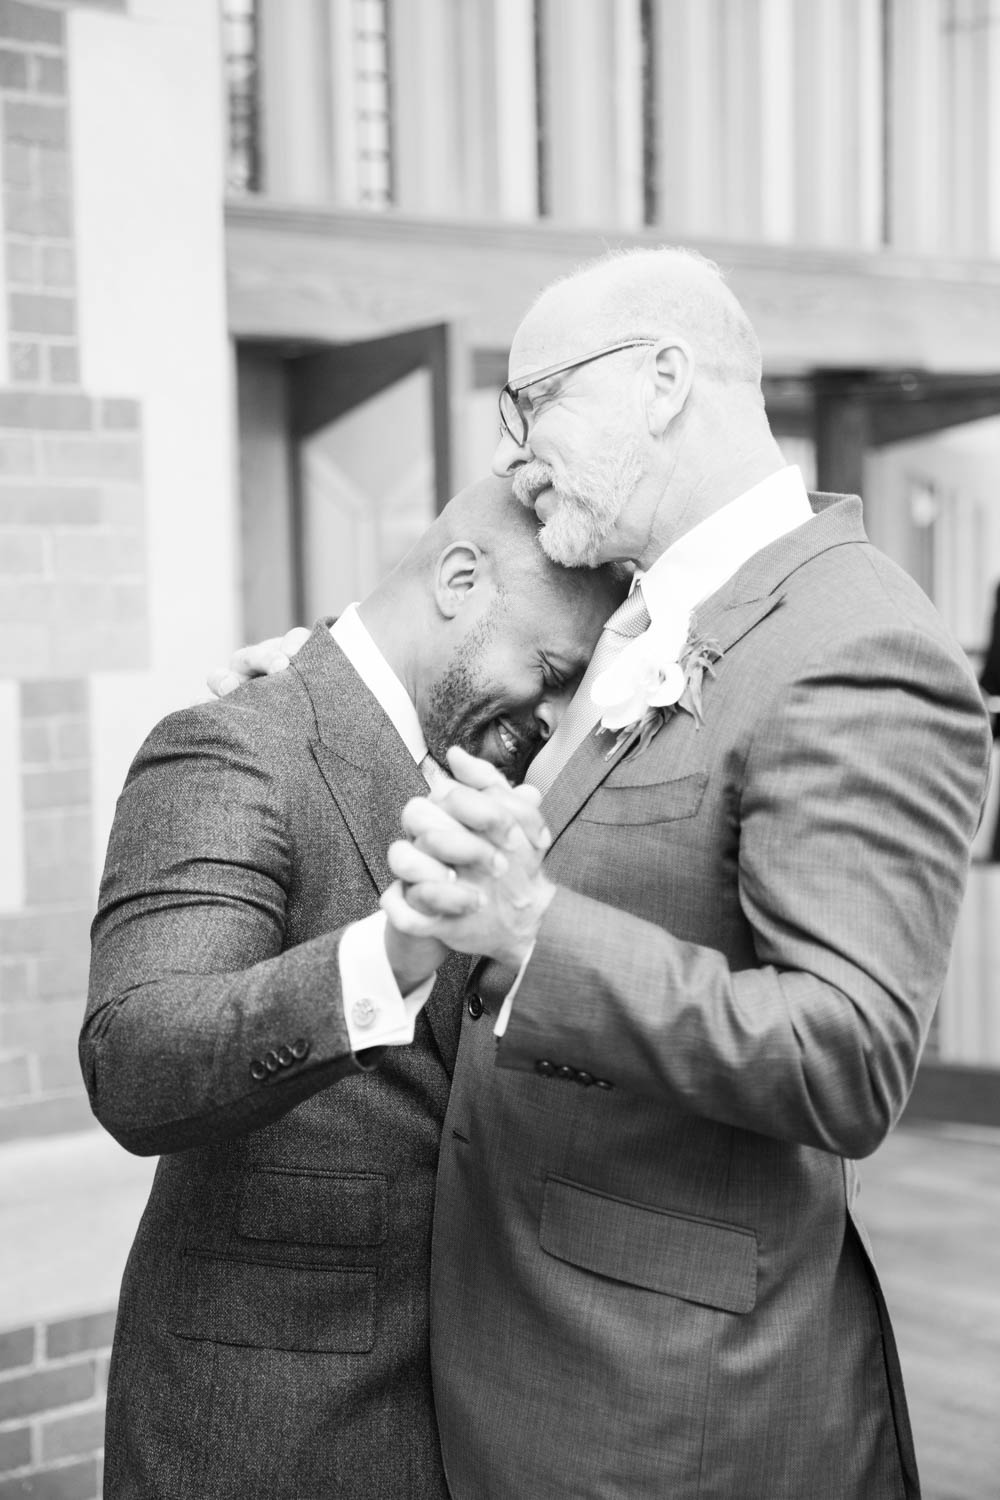 Christian and Clifton's intimate hometown Ohio wedding at Jeffrey Mansion Photo by Starling Studio Featured on Equally Wed, the world's leading LGBTQ+ wedding magazine